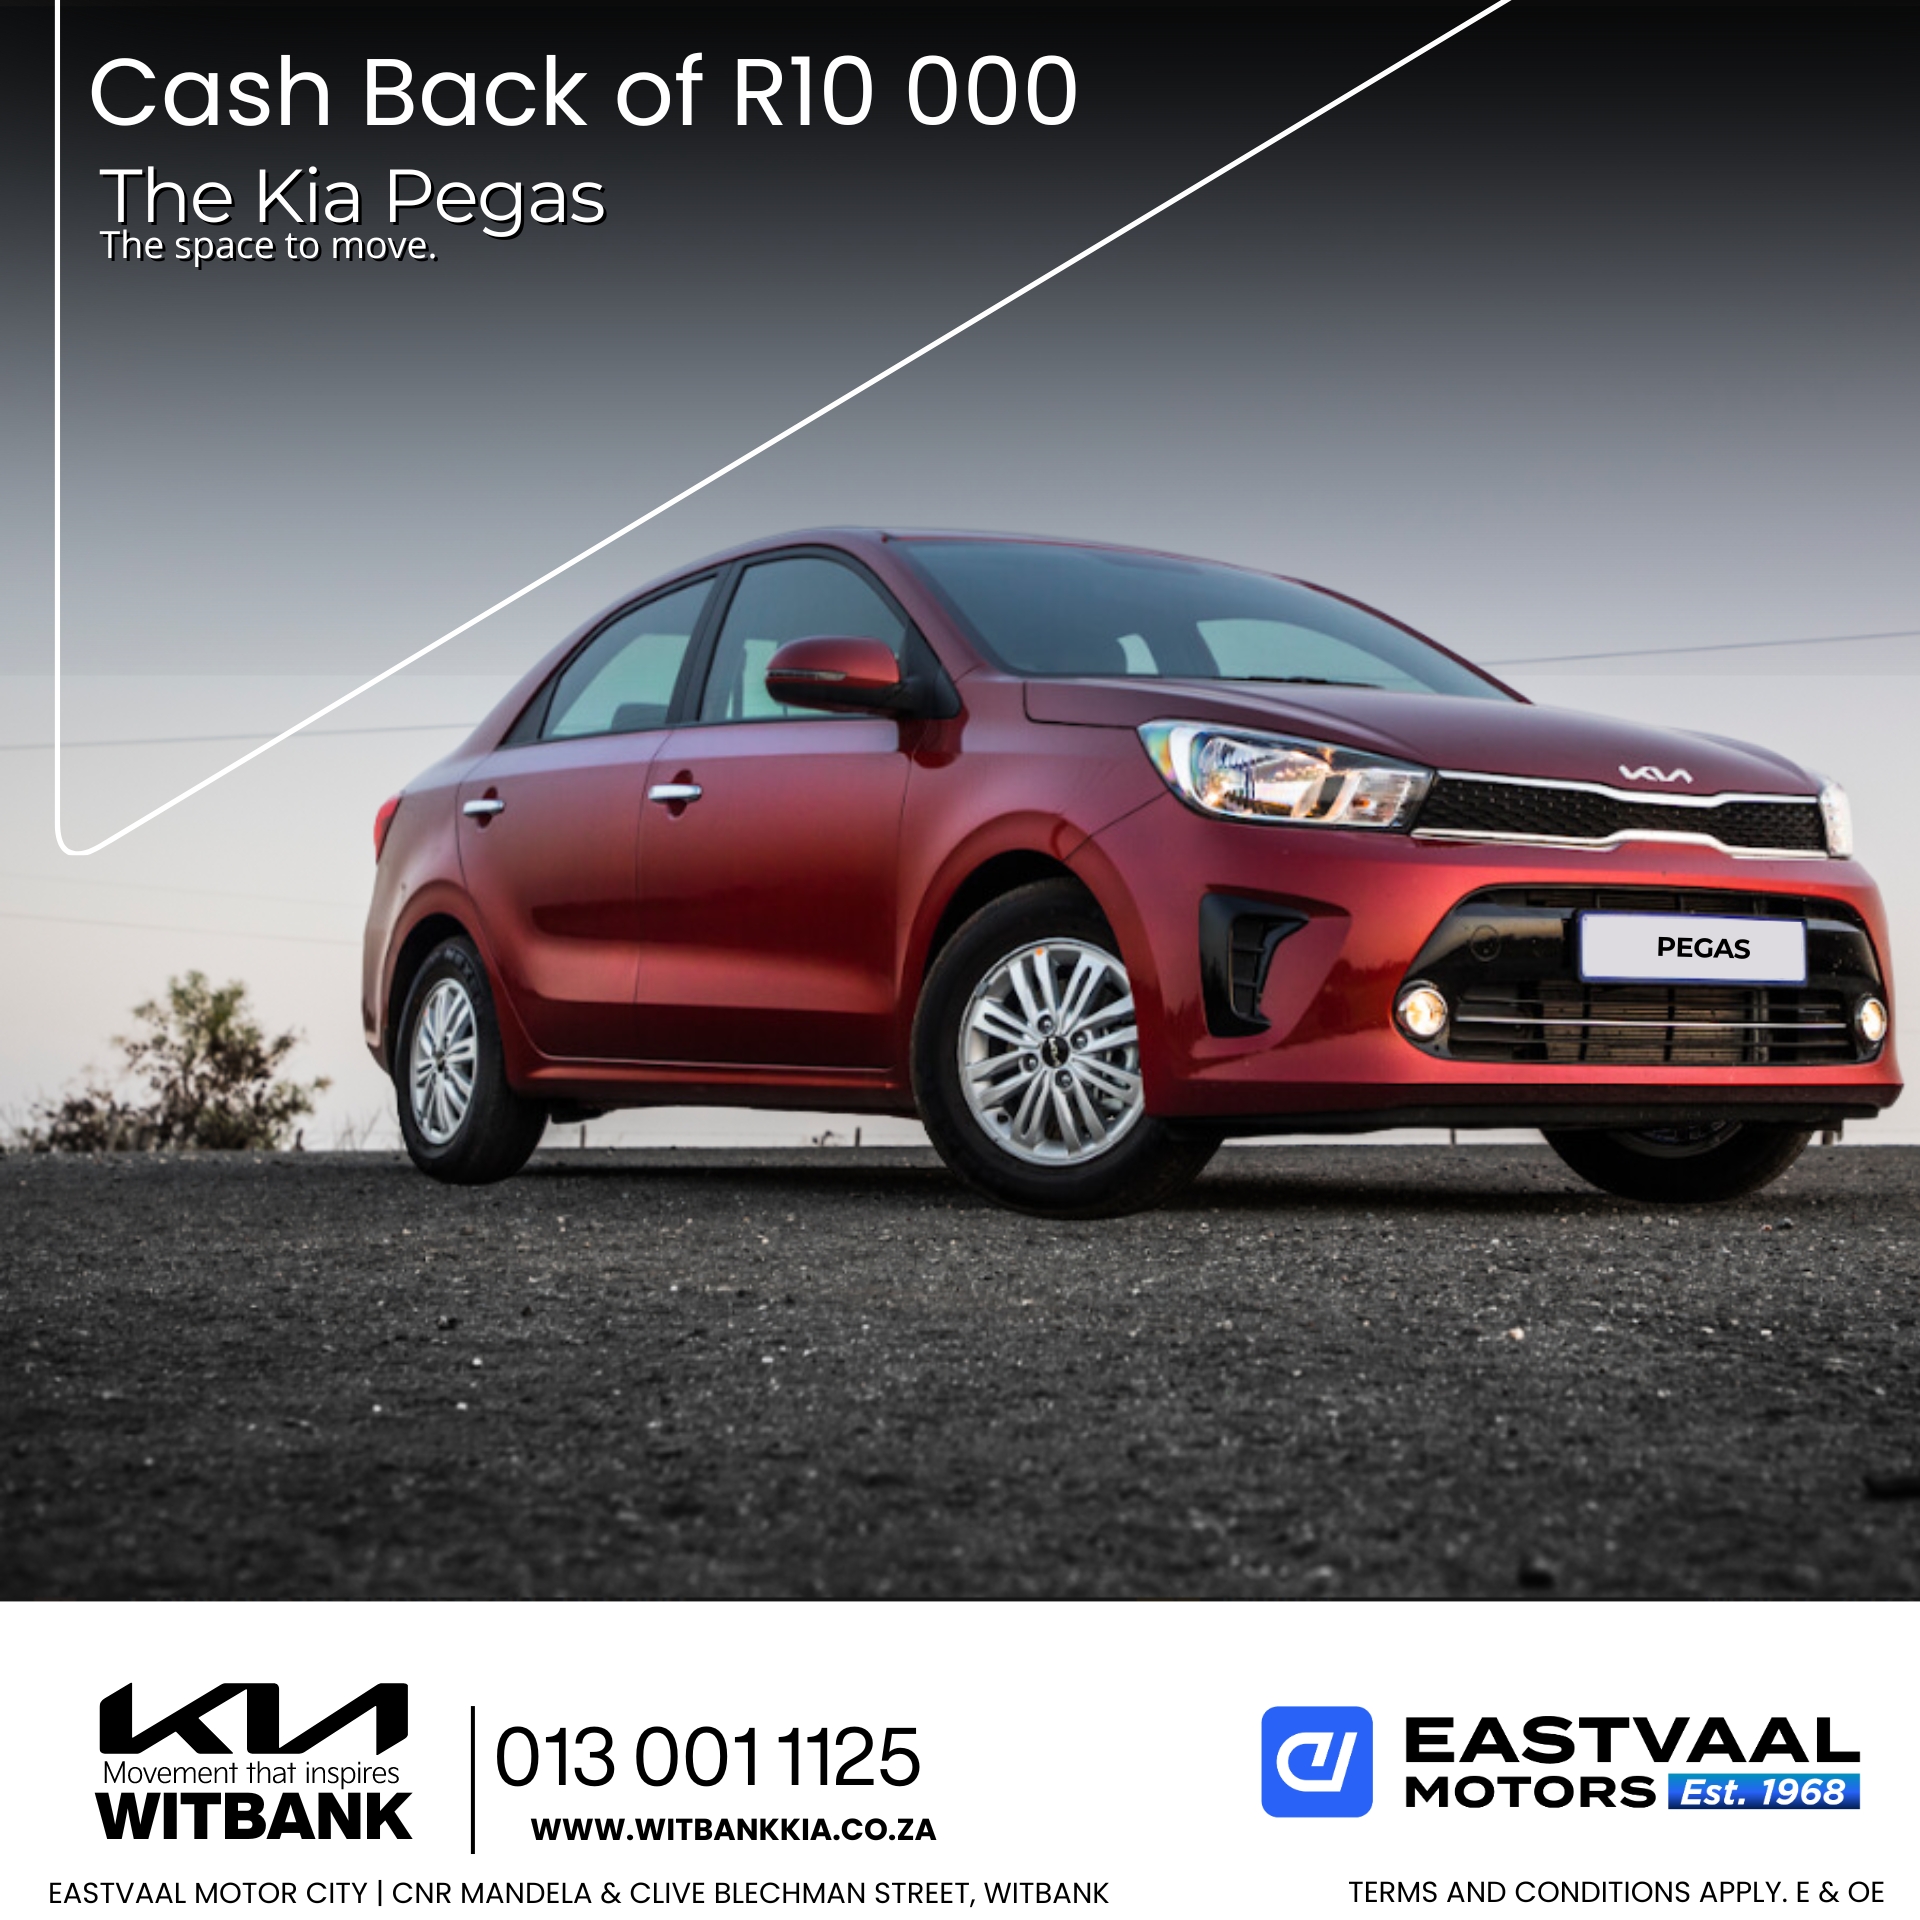 July is the perfect month to drive home a Kia. Explore our special offers at Eastvaal Motor City! image from Eastvaal Motors